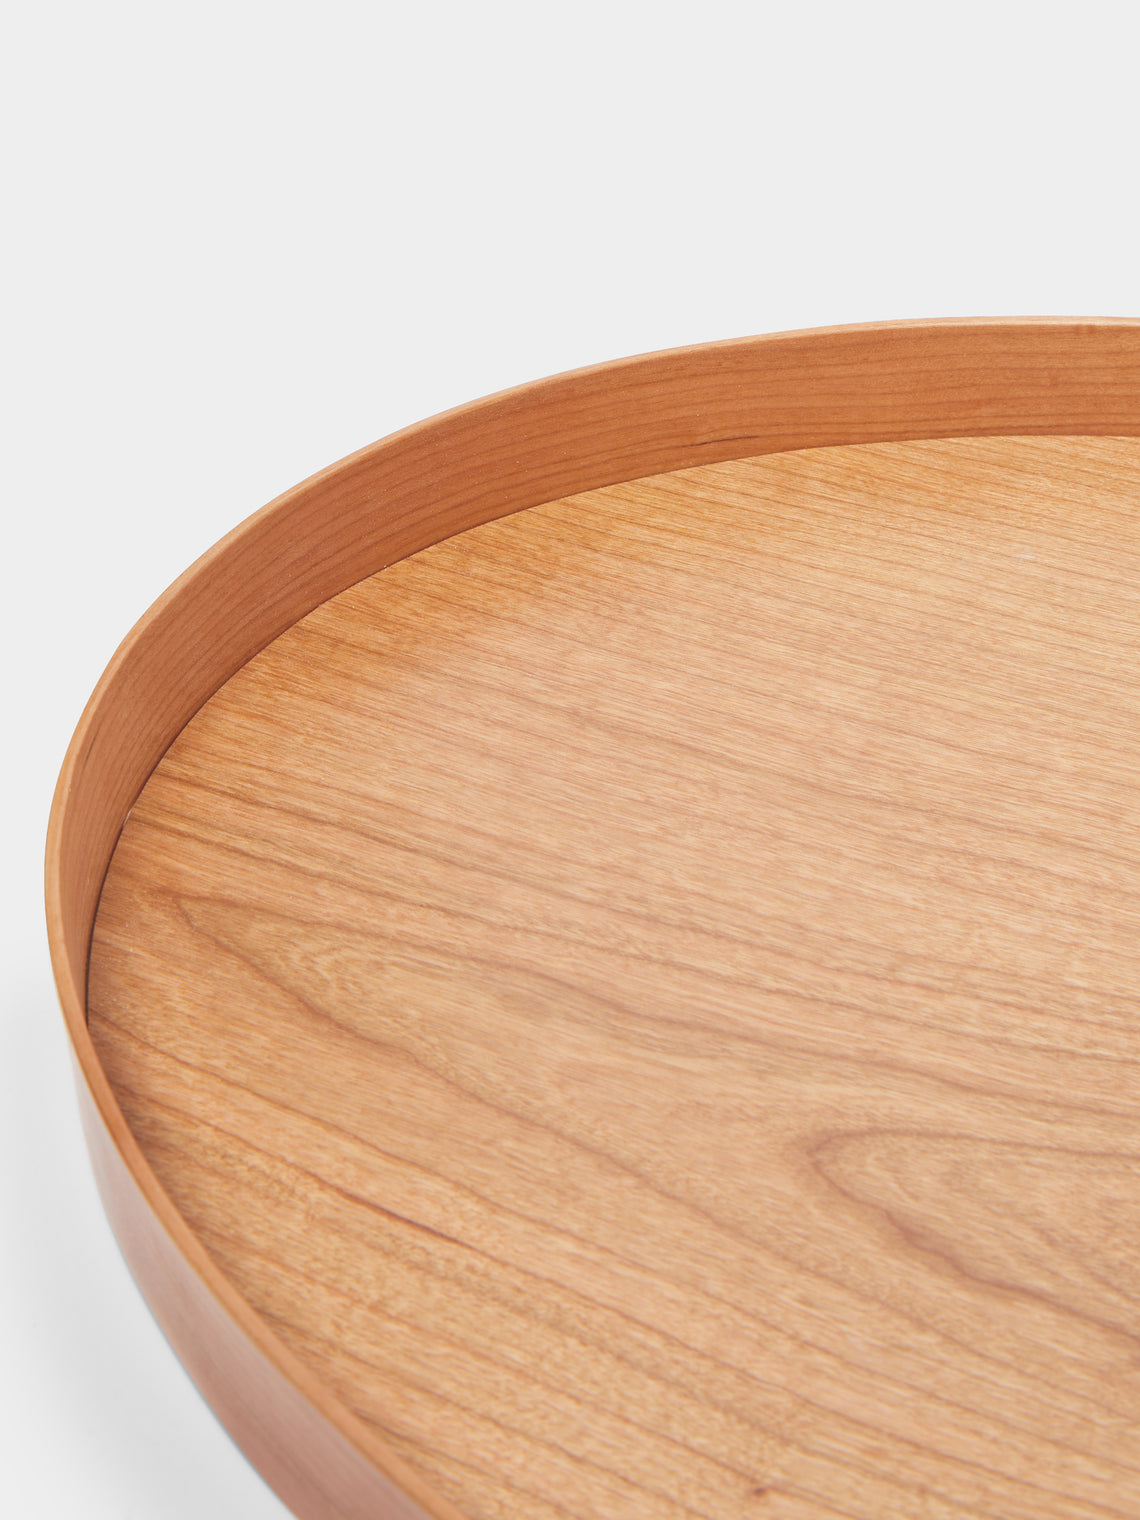 Rikke Falkow - Cherry Wood Small Oval Serving Tray -  - ABASK